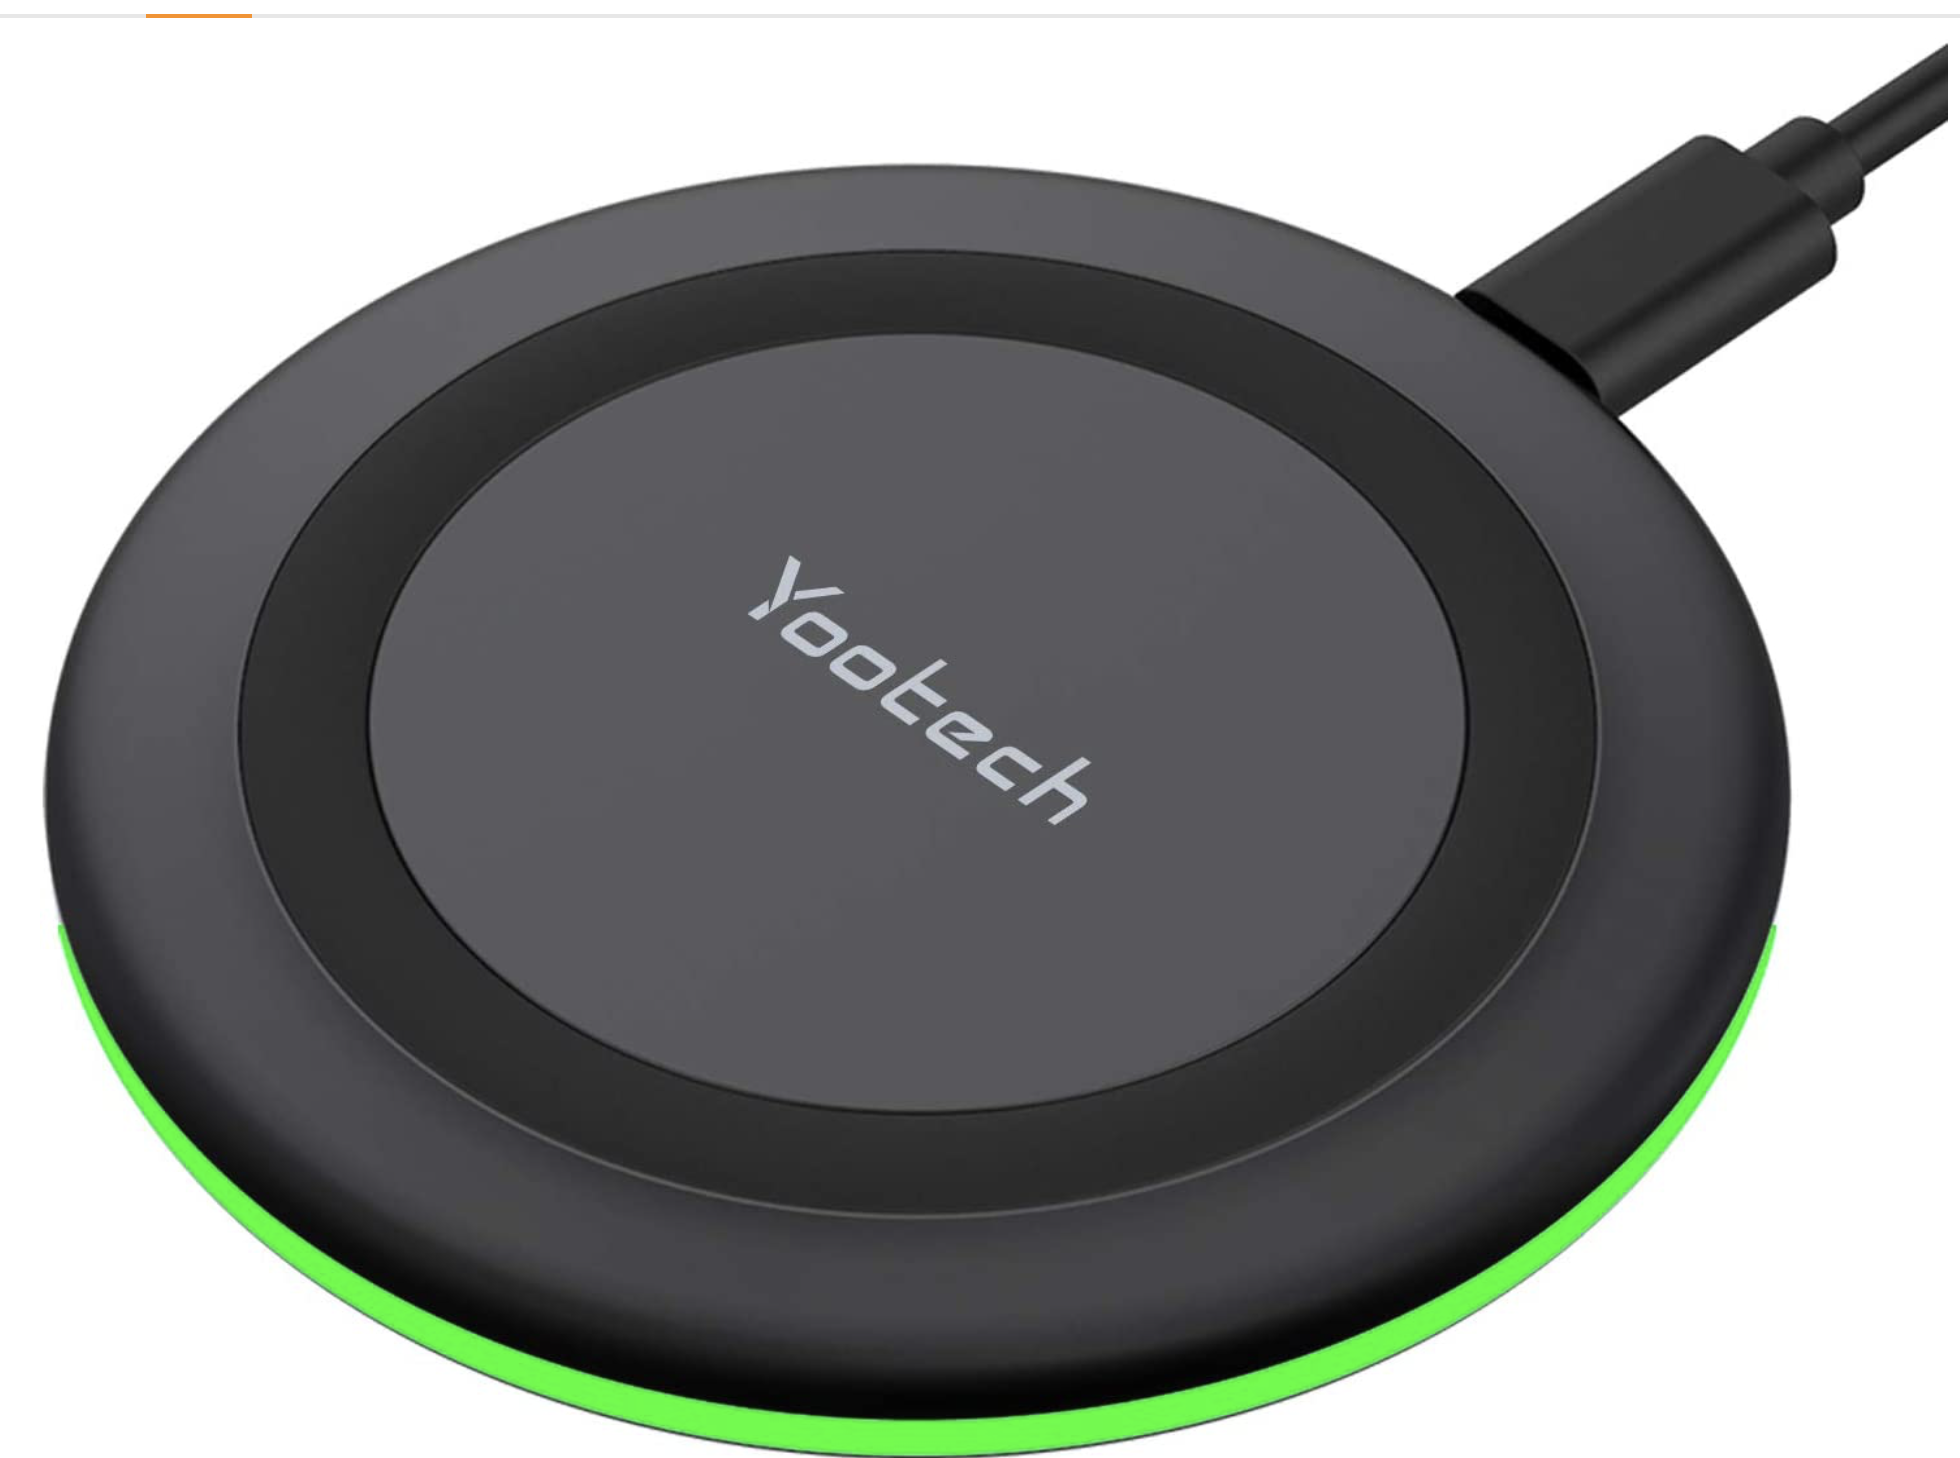 Yootech Wireless Charger,10W Max Fast $13.99